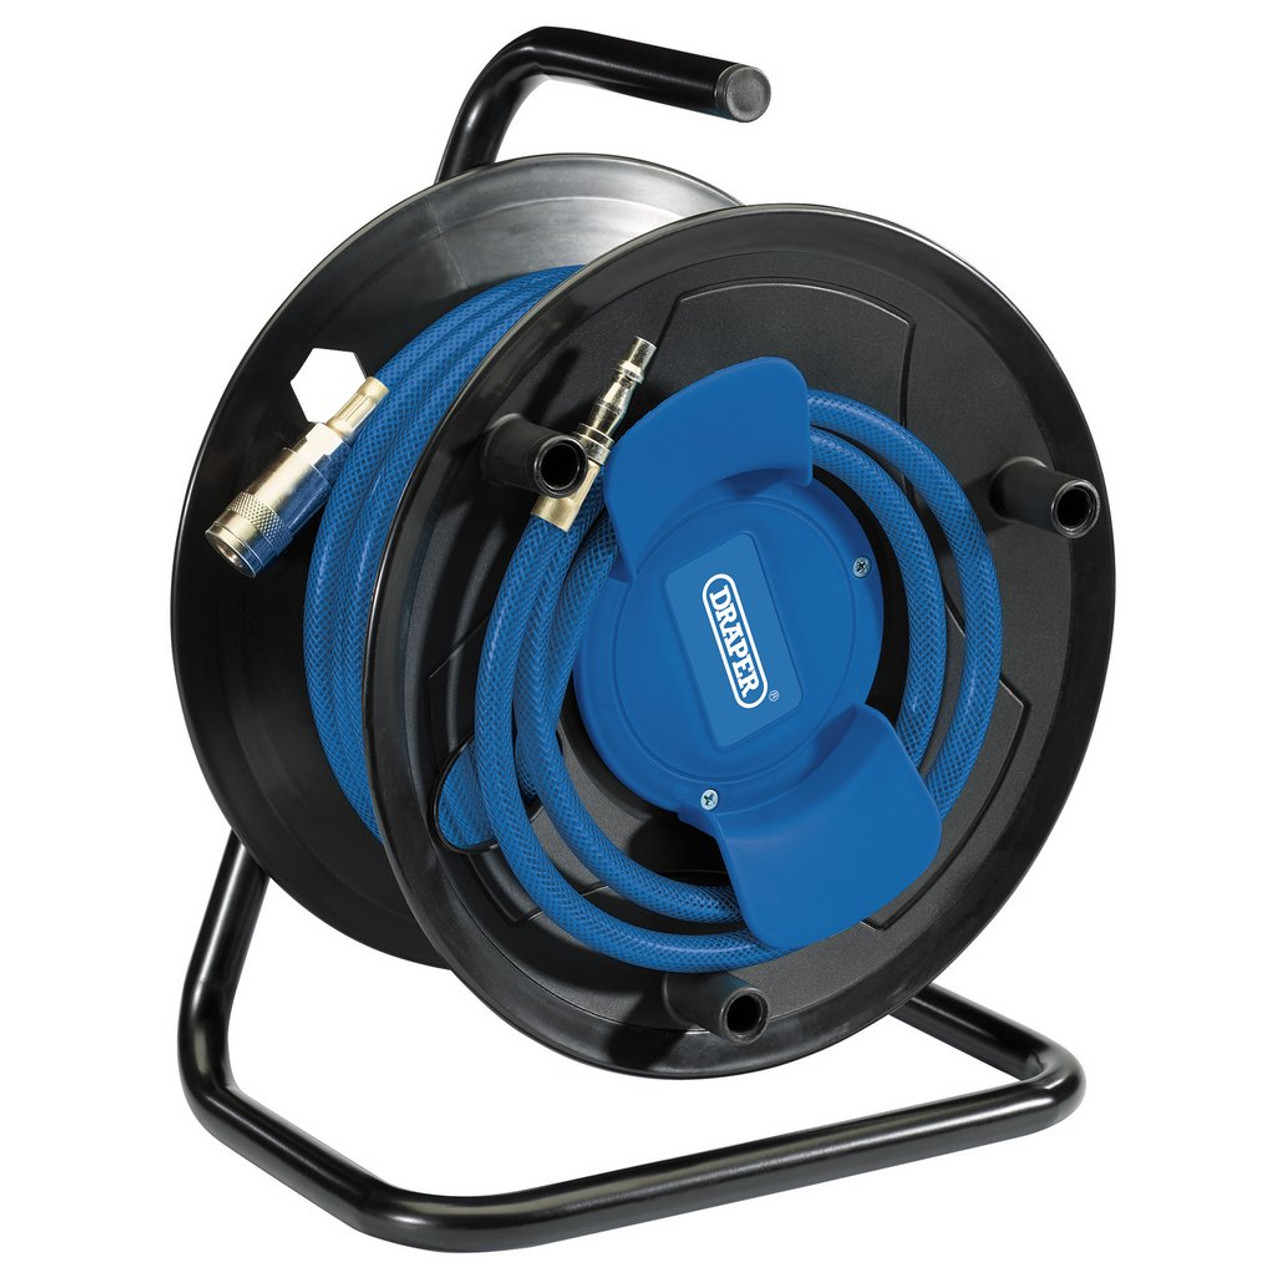 Brennenstuhl Hose Reel with 20m Water Hose (Spraying Nozzle